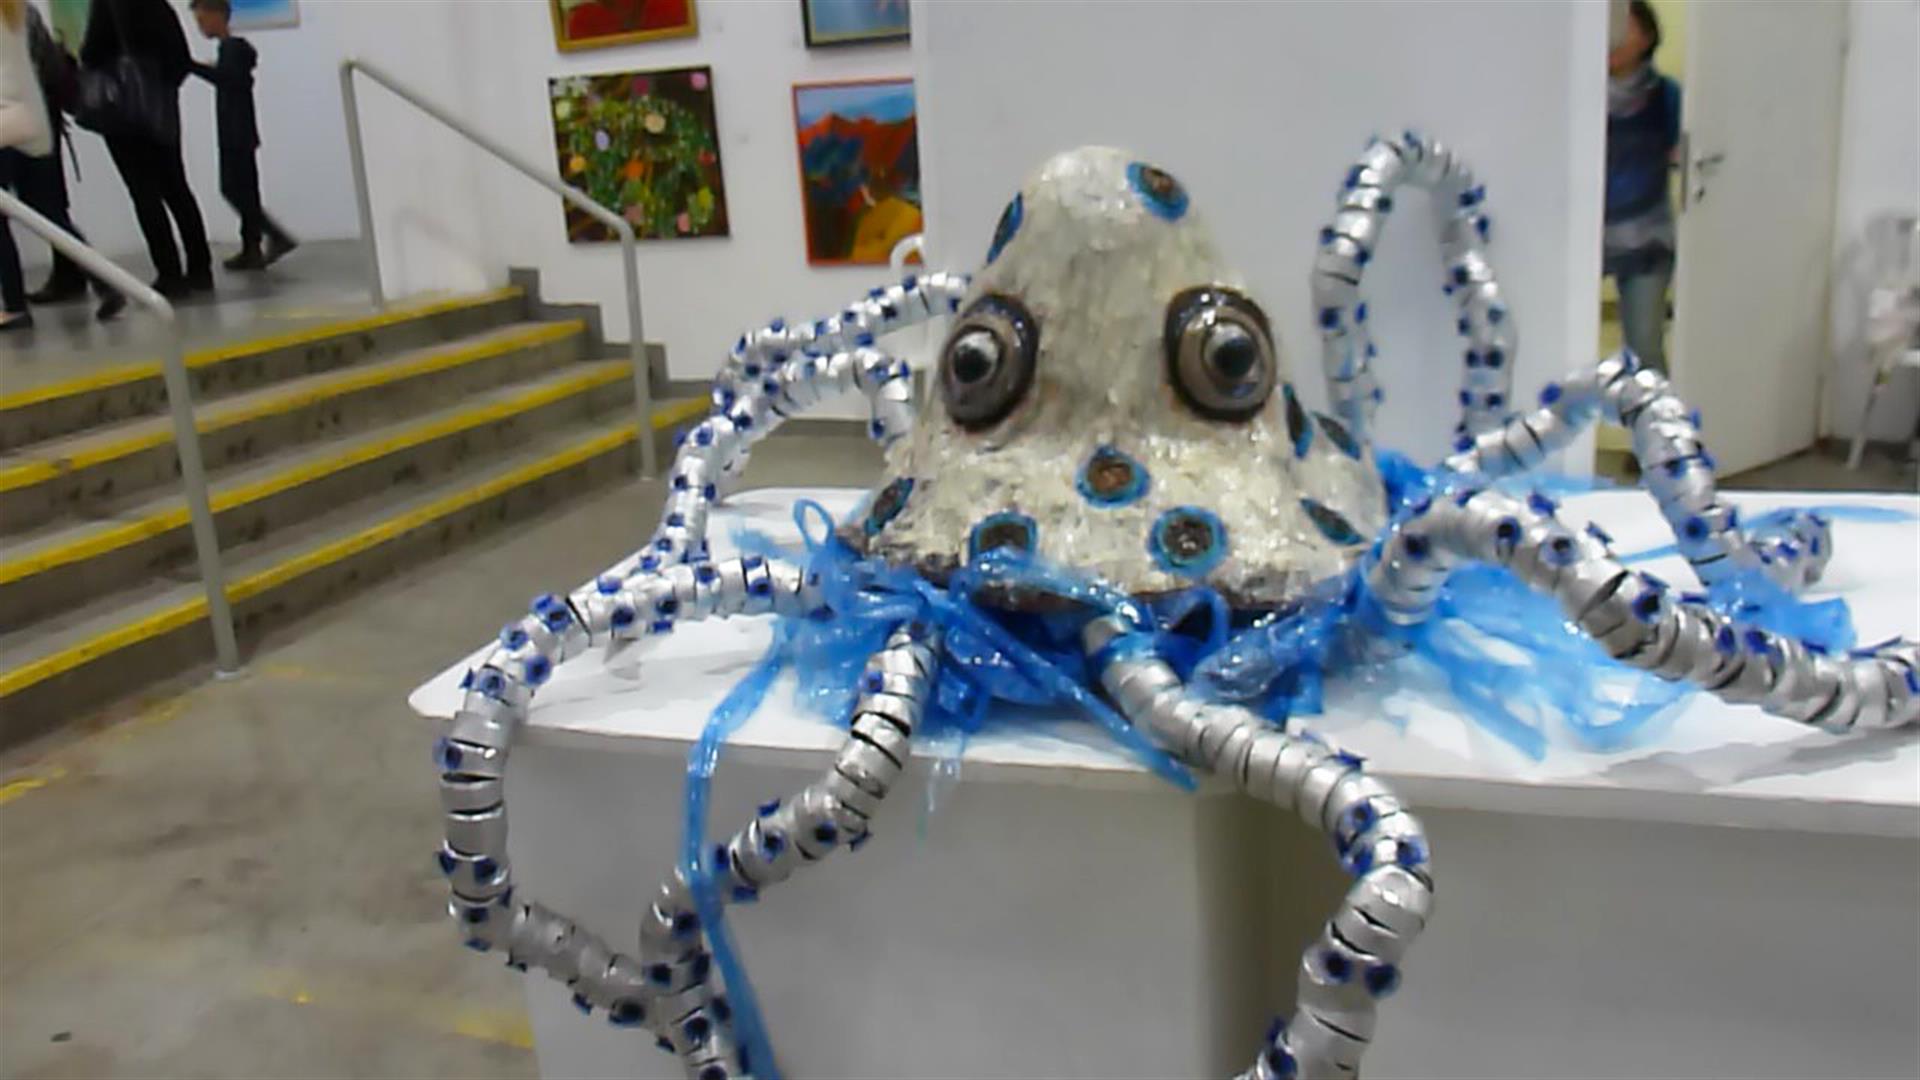 Blue octopus rings - ecological art for the marine animals suffocating from the plastic polluting the ocean